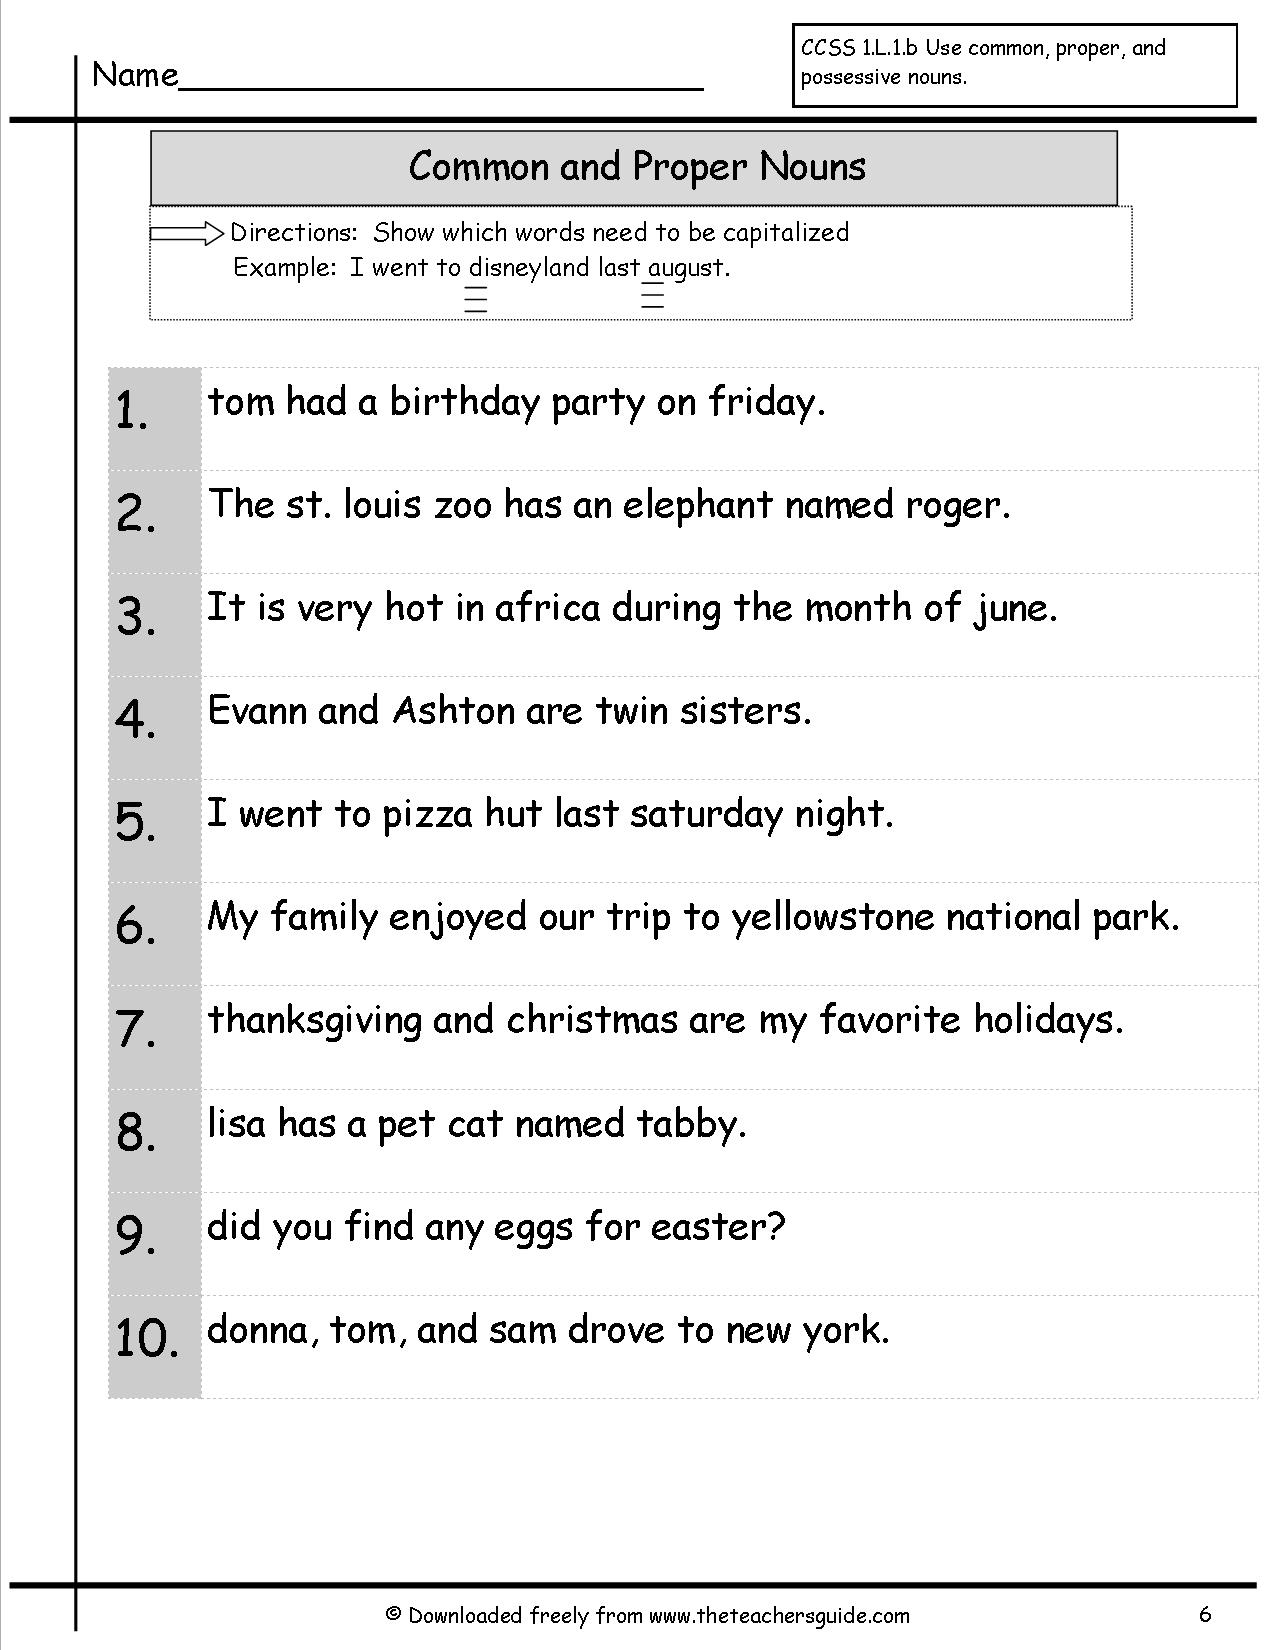 13-best-images-of-common-and-proper-nouns-worksheets-common-and-proper-noun-worksheet-first